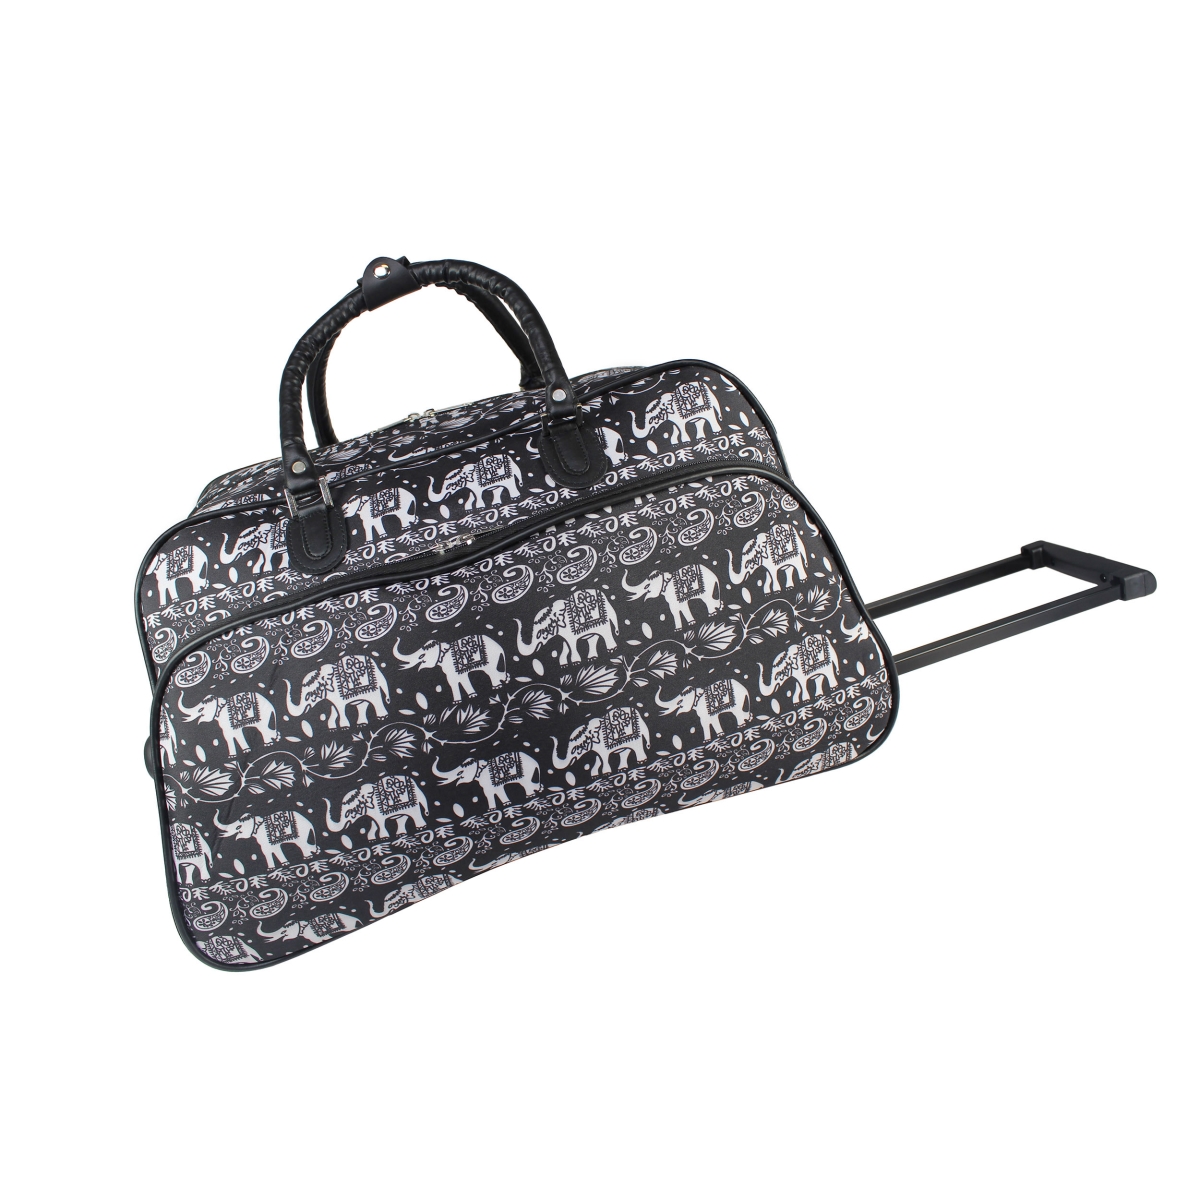 8112022-227-b 21 In. Carry On Rolling Duffel Bag - Black White Elephant